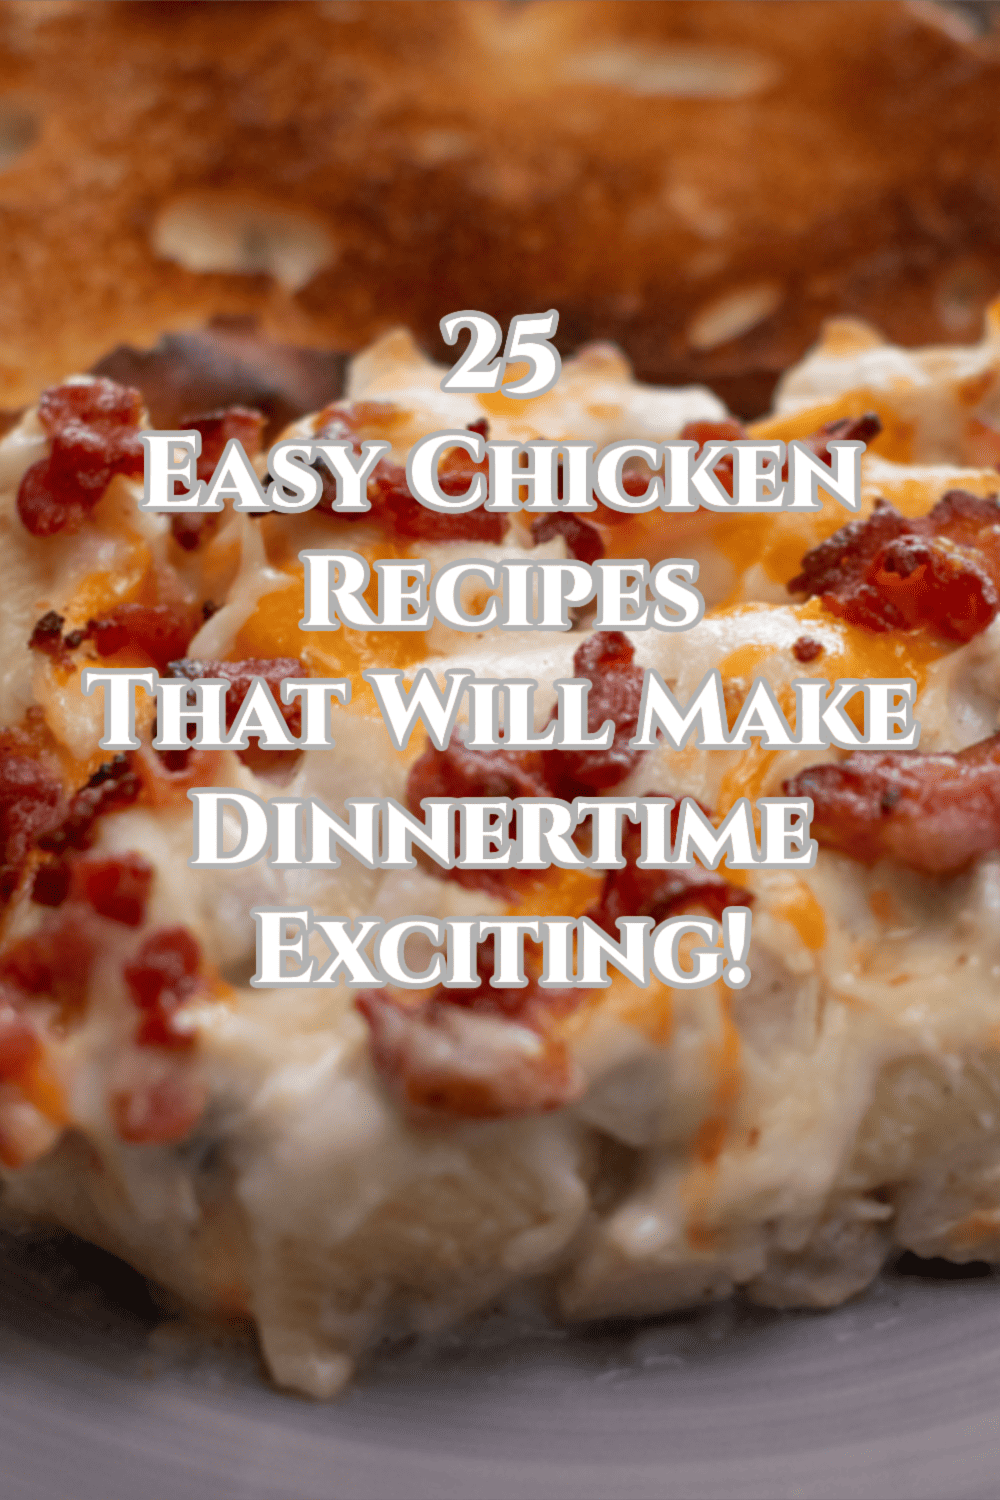 From chicken tenders to Chicken Cacciatore, there may be some new recipes on here that you have never thought of making, so go ahead, think out of the (fried chicken) box! via @Mooreorlesscook